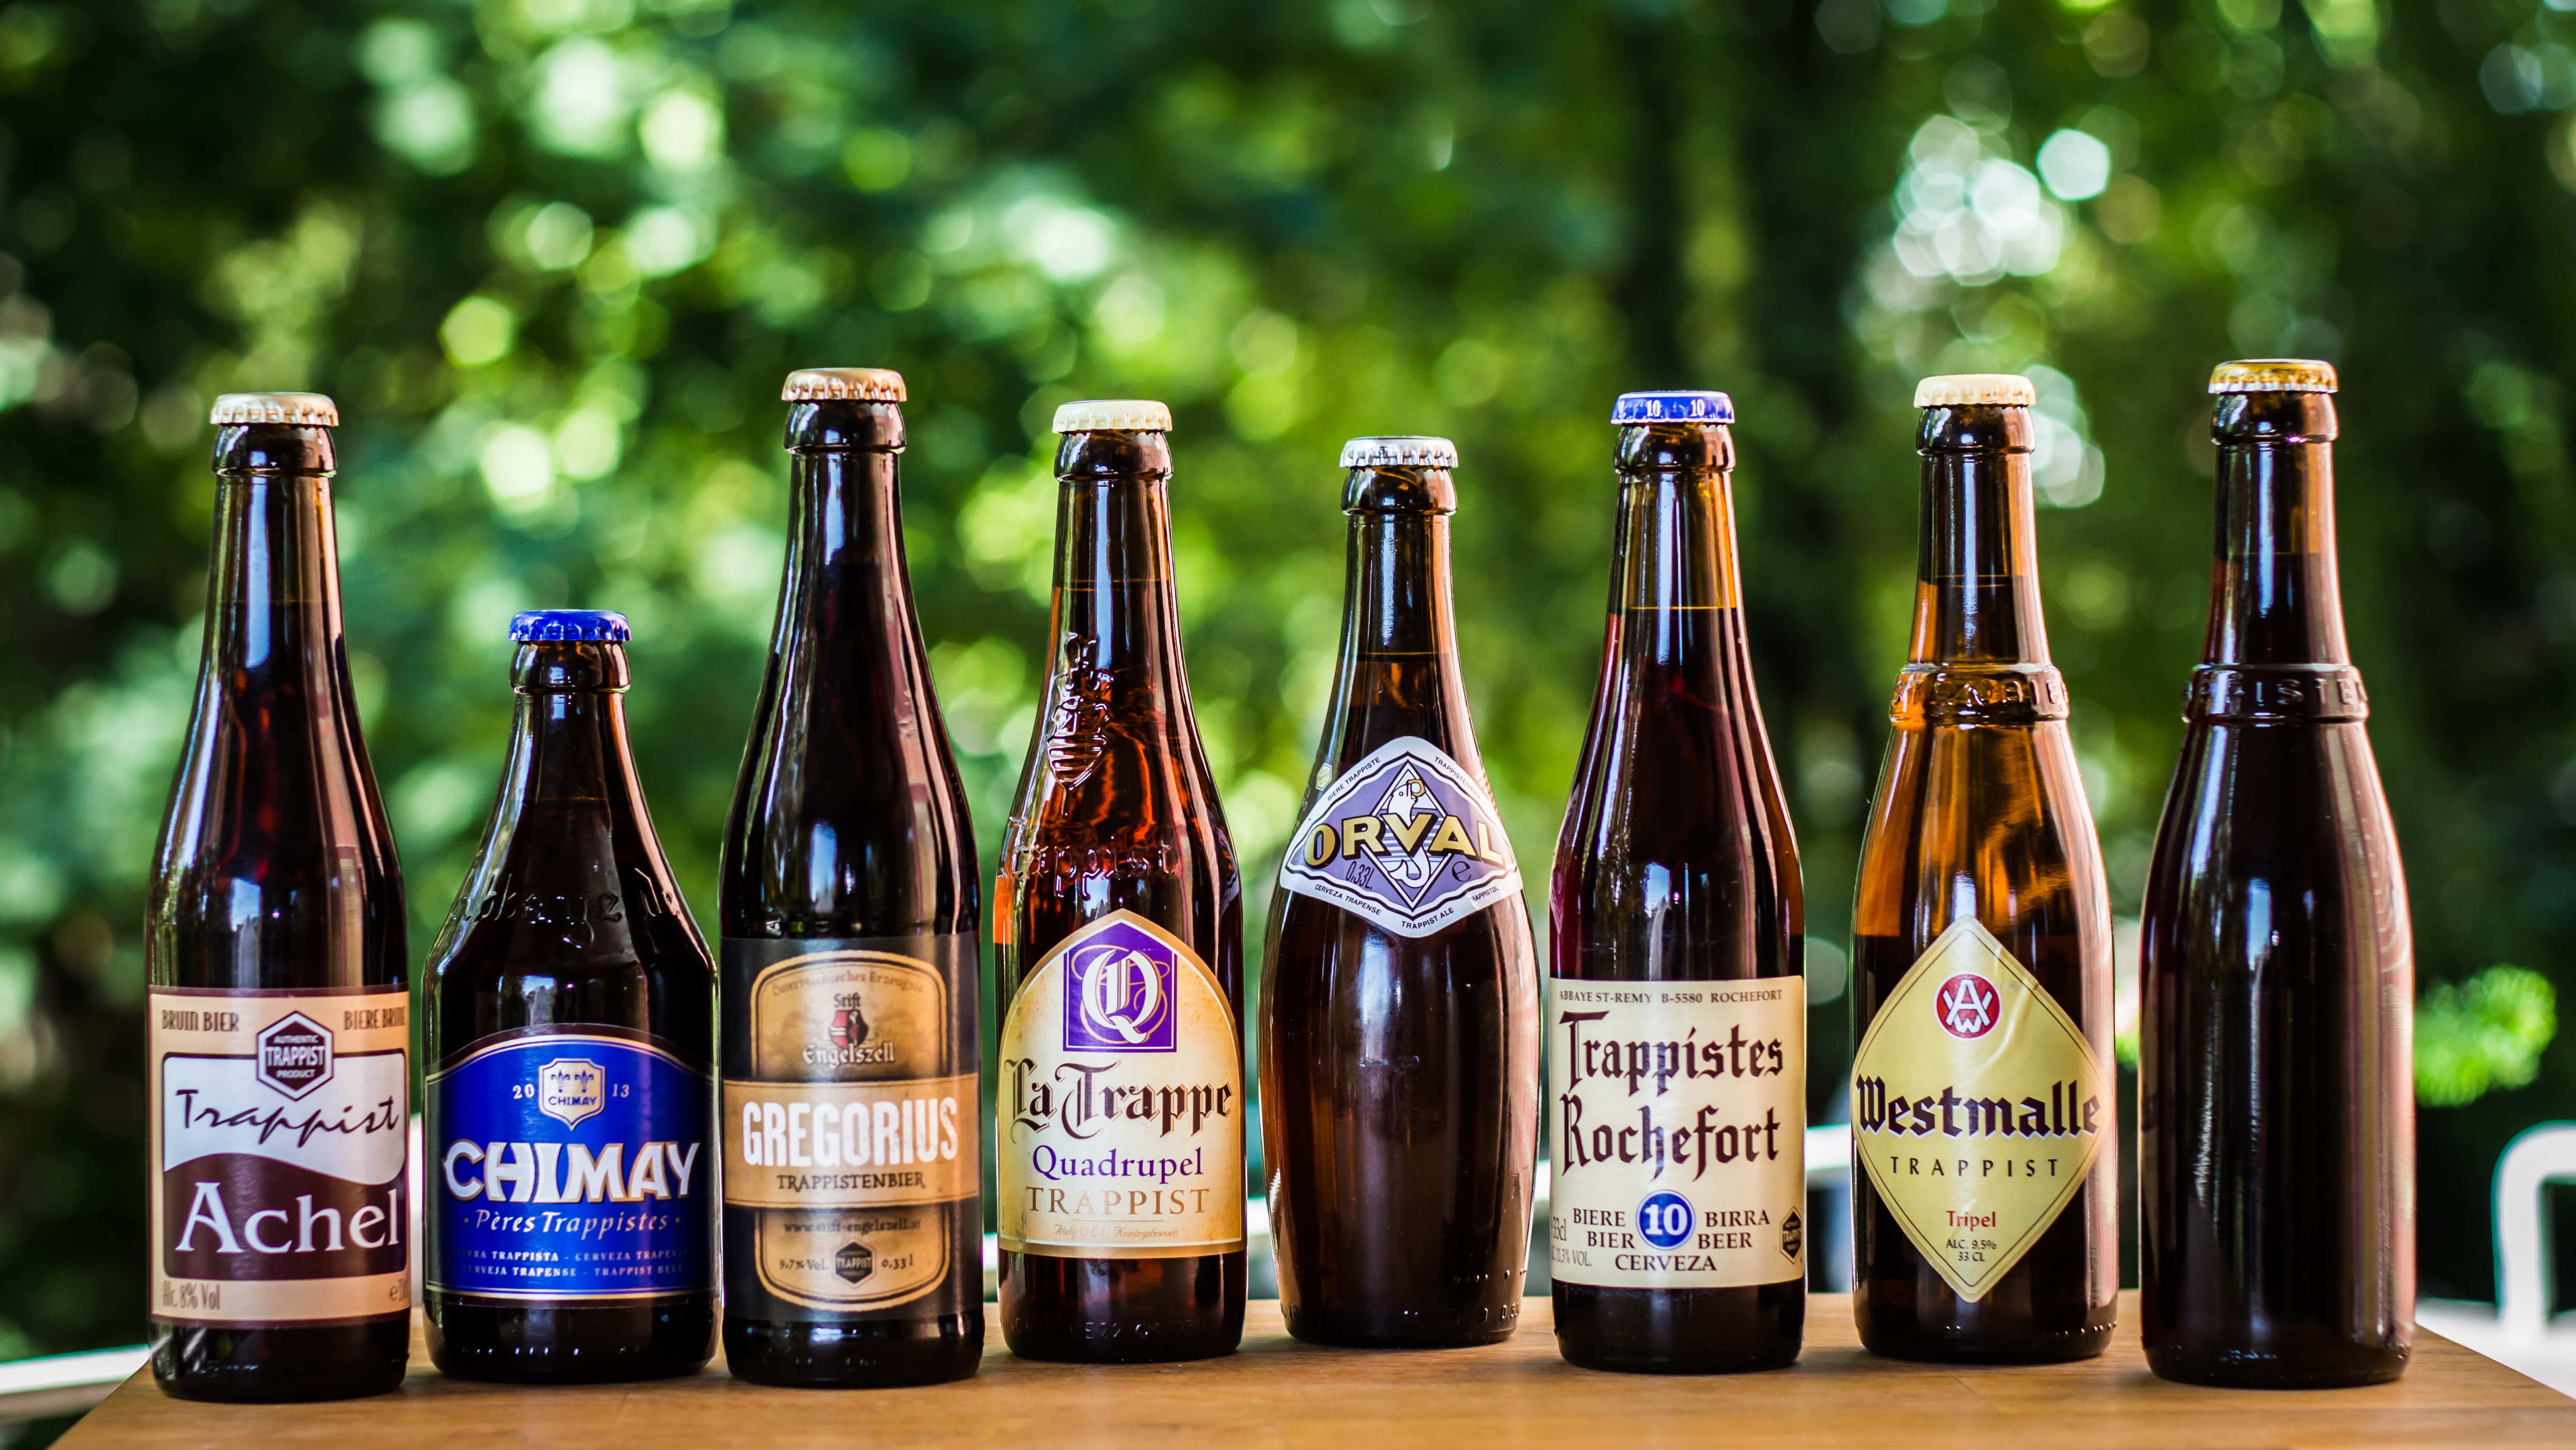 Trappist Beer 2013-08-31 (cropped).jpg